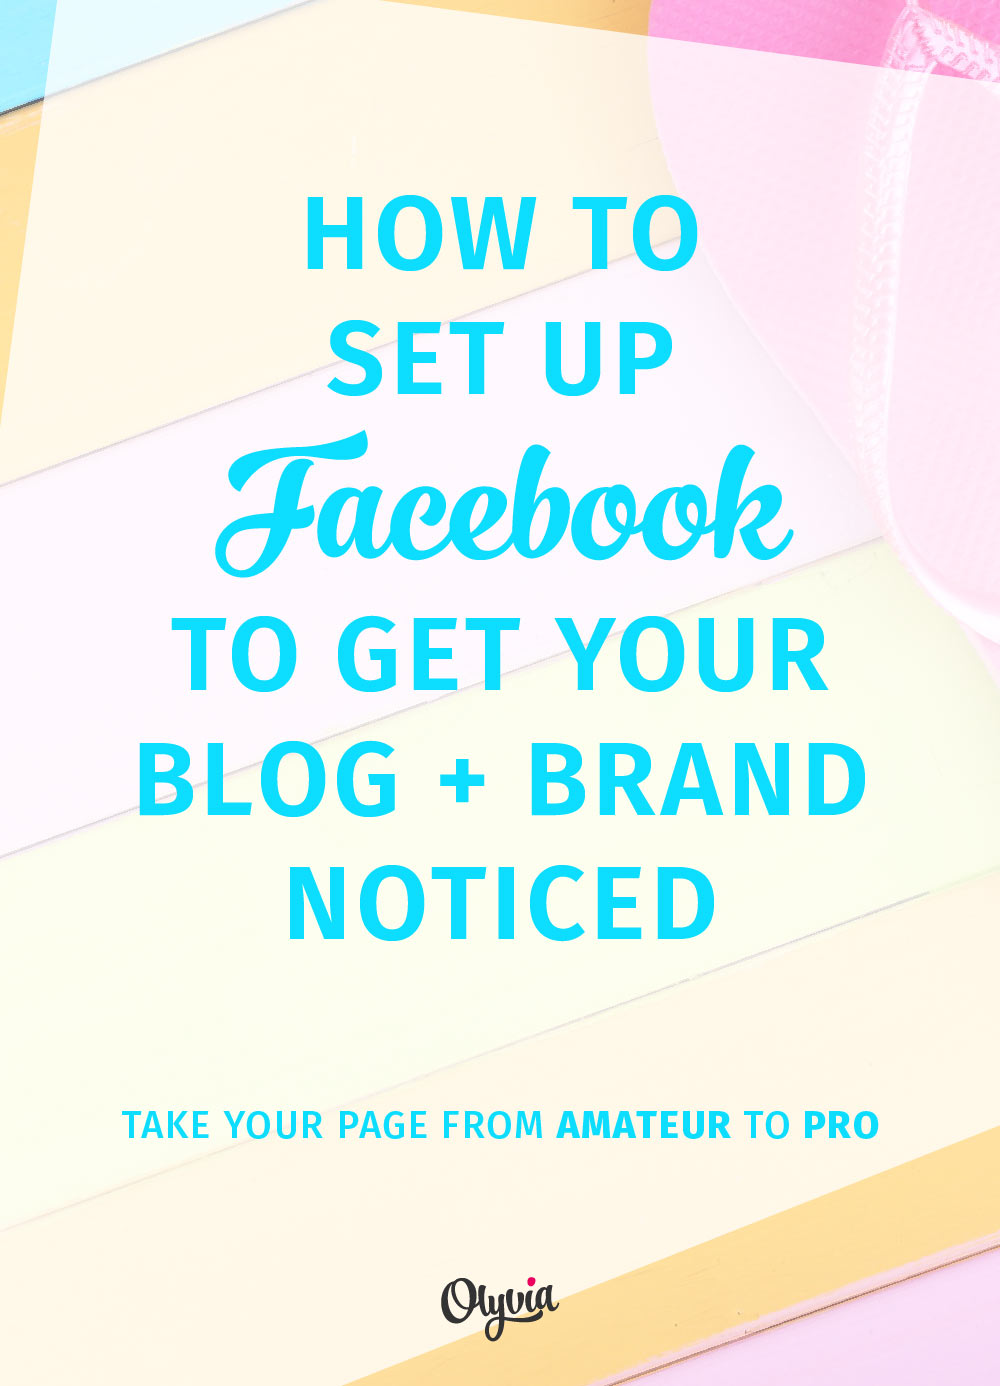 How to get noticed on Facebook: how to set up it up (the right way) and take your Page from amateur to pro.